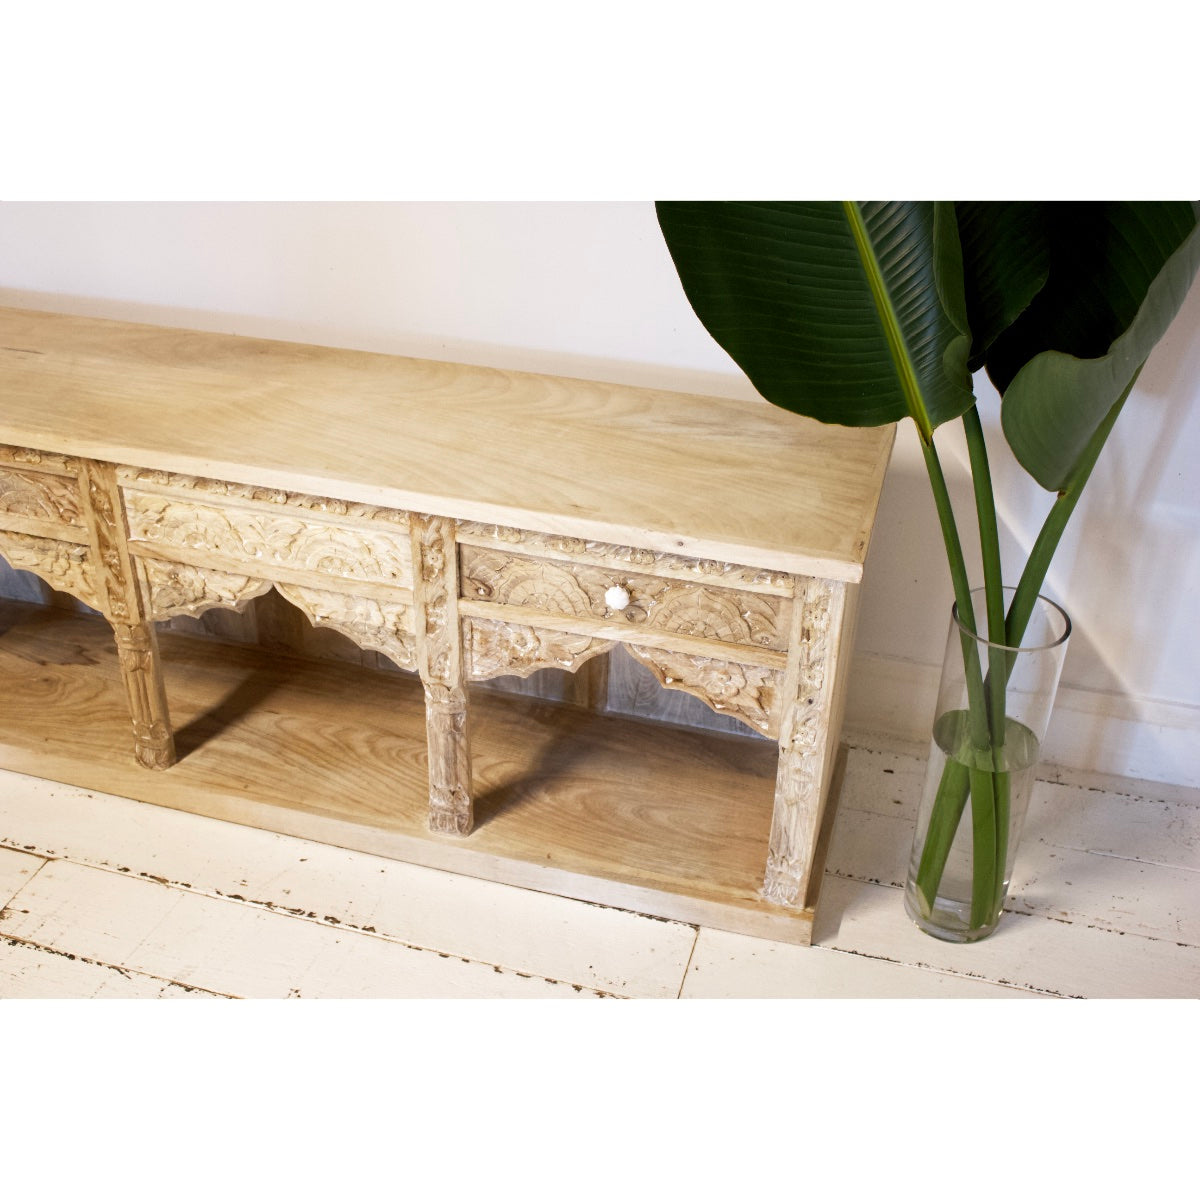 Low Indian Acid Wash Arch Timber Sideboard 200cm